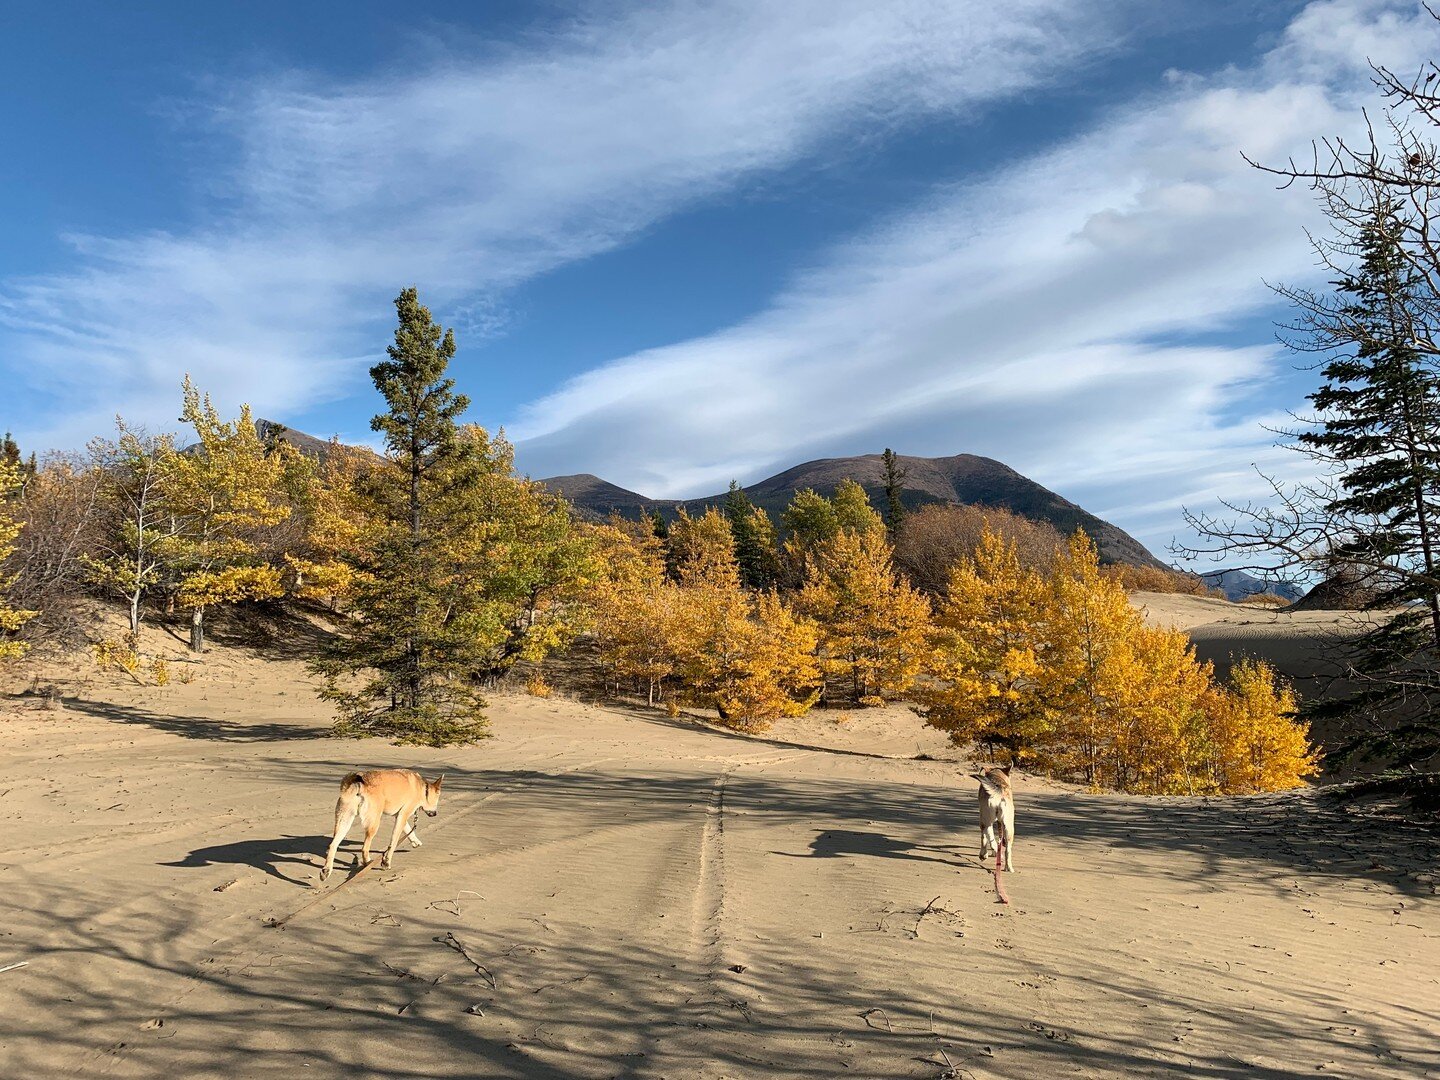 Did you know... 
That the Yukon is home to the world's smallest desert? Located in Carcross, Yukon, this &quot;miniature&quot; desert measures 2.6 km. 

📷 Laurie Luciano &amp; the pups

#theyukoniscalling #YukonTours #ExploreYukon #ExploreCanada